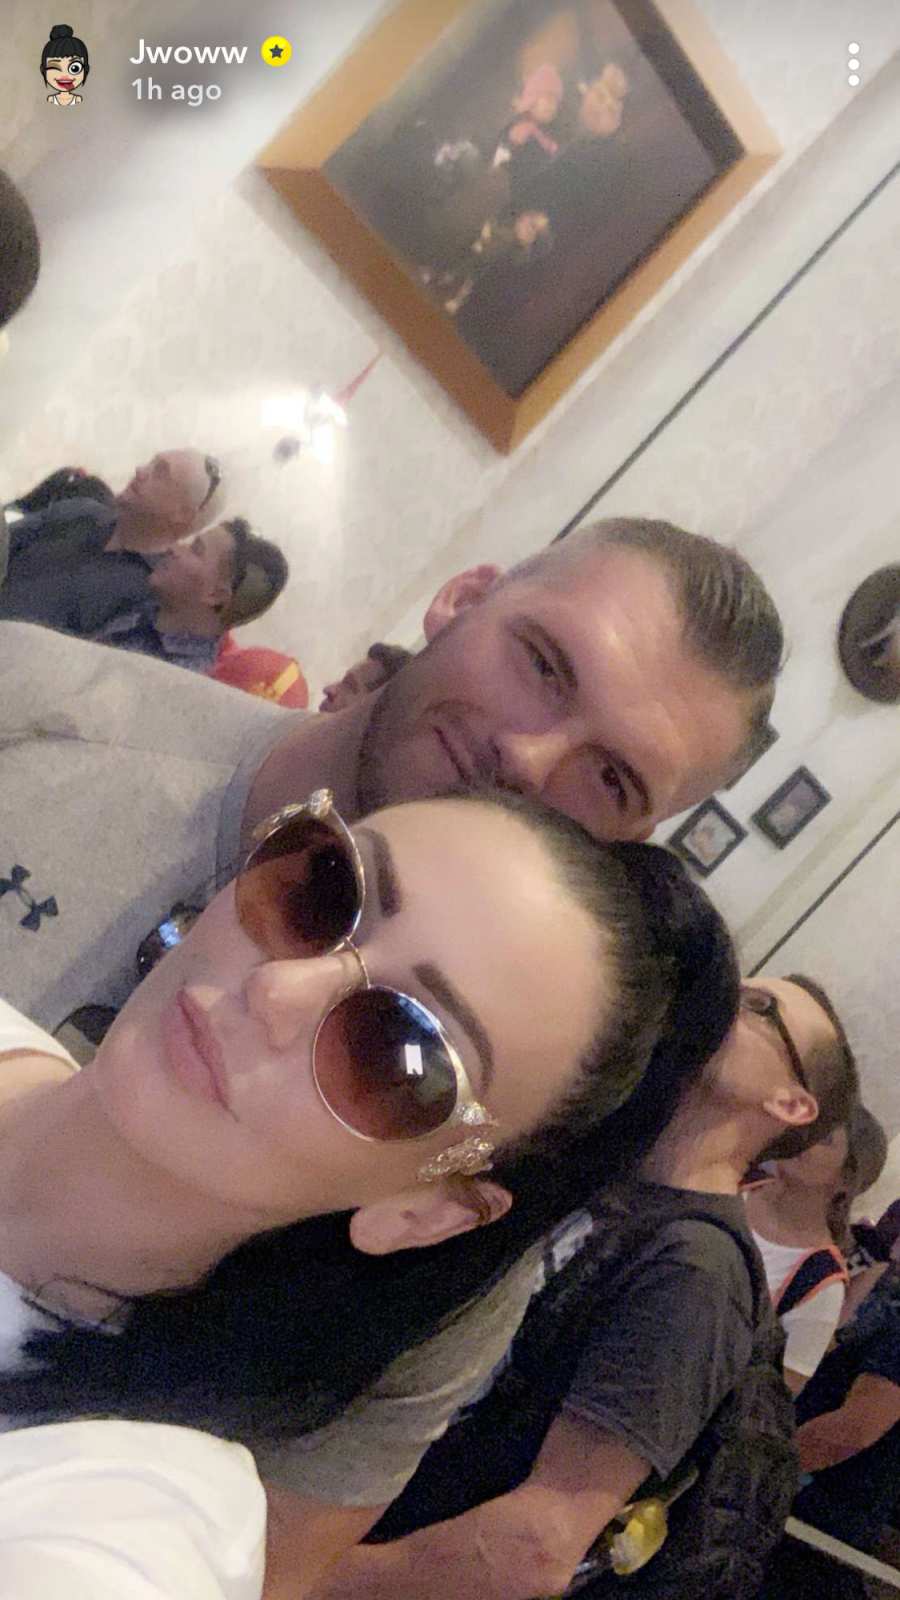 JWoww’s ‘Jersey Shore’ Pals Show Support for Her New Boyfriend As They Visit Harry Potter World Instagram Jwoww and Zack Clayton Carpinello